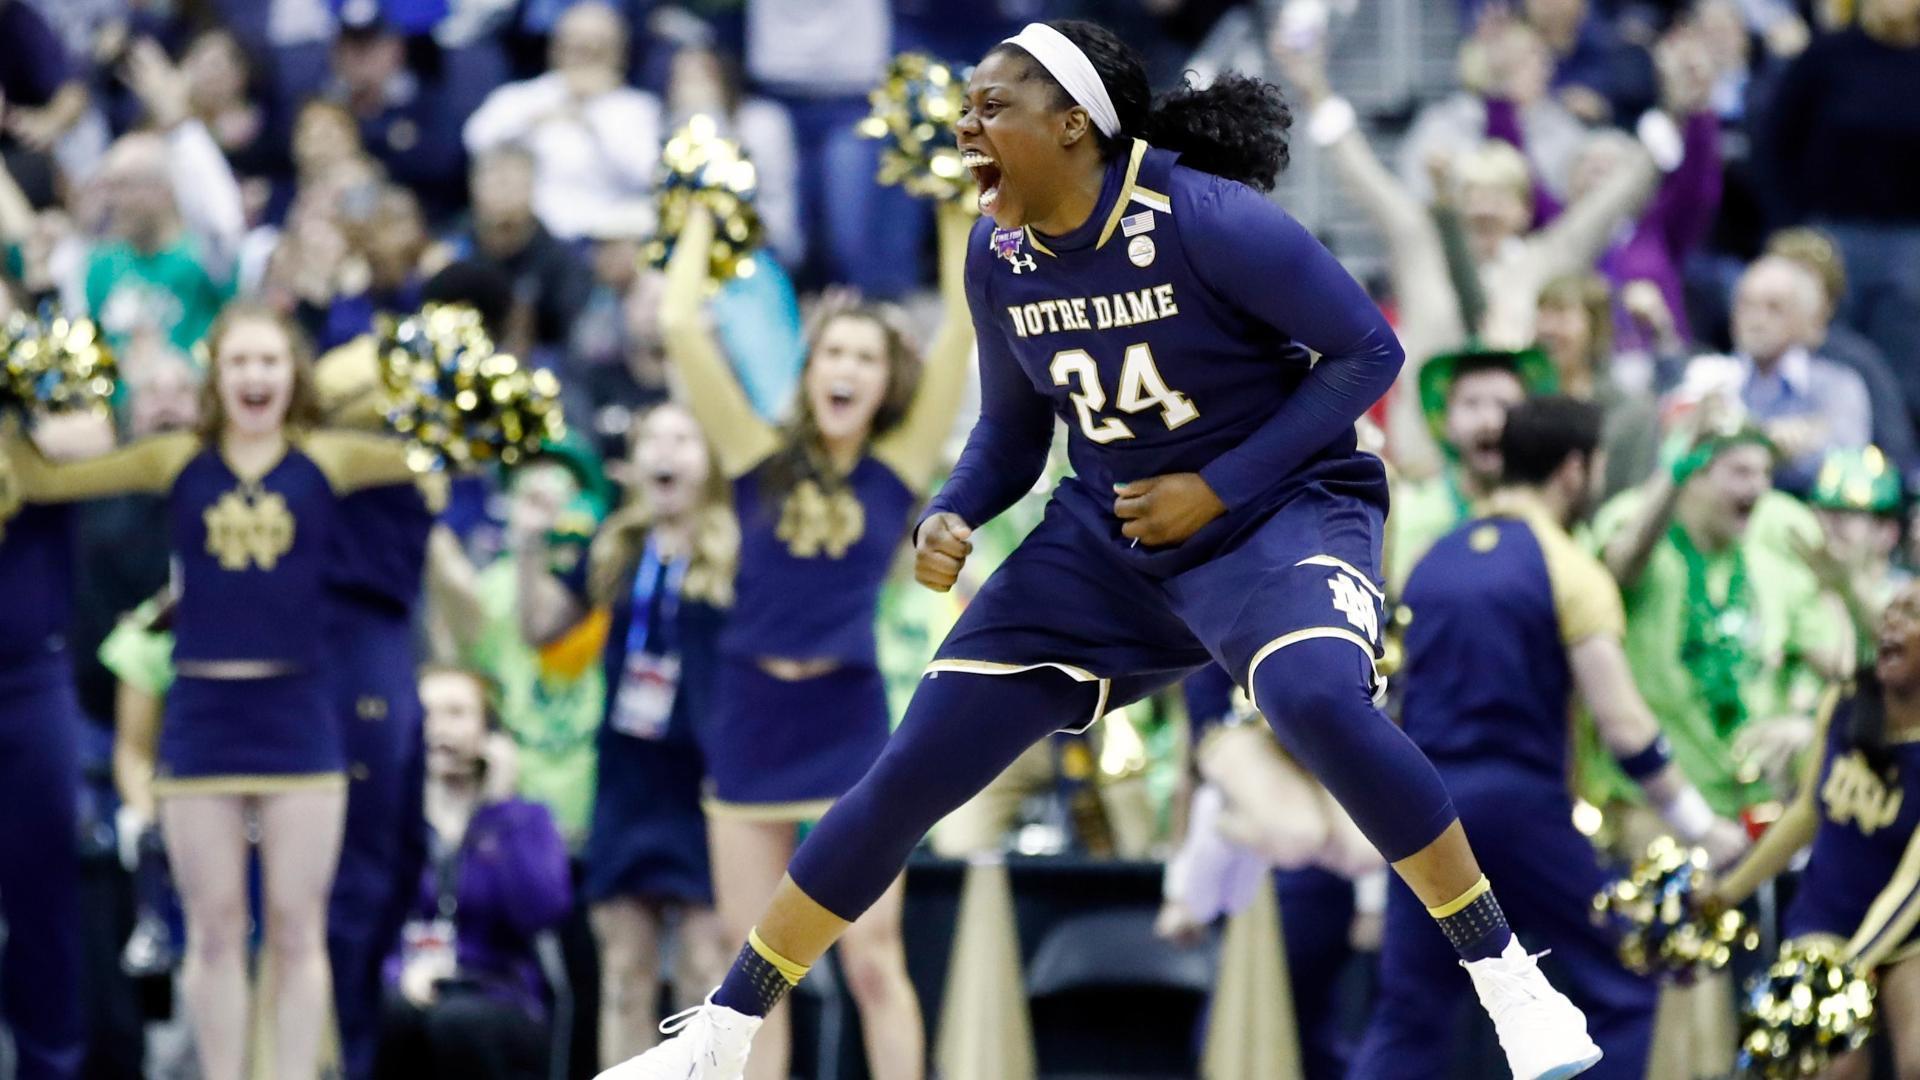 Ogunbowale remembers the buzzer-beaters that made ND champions